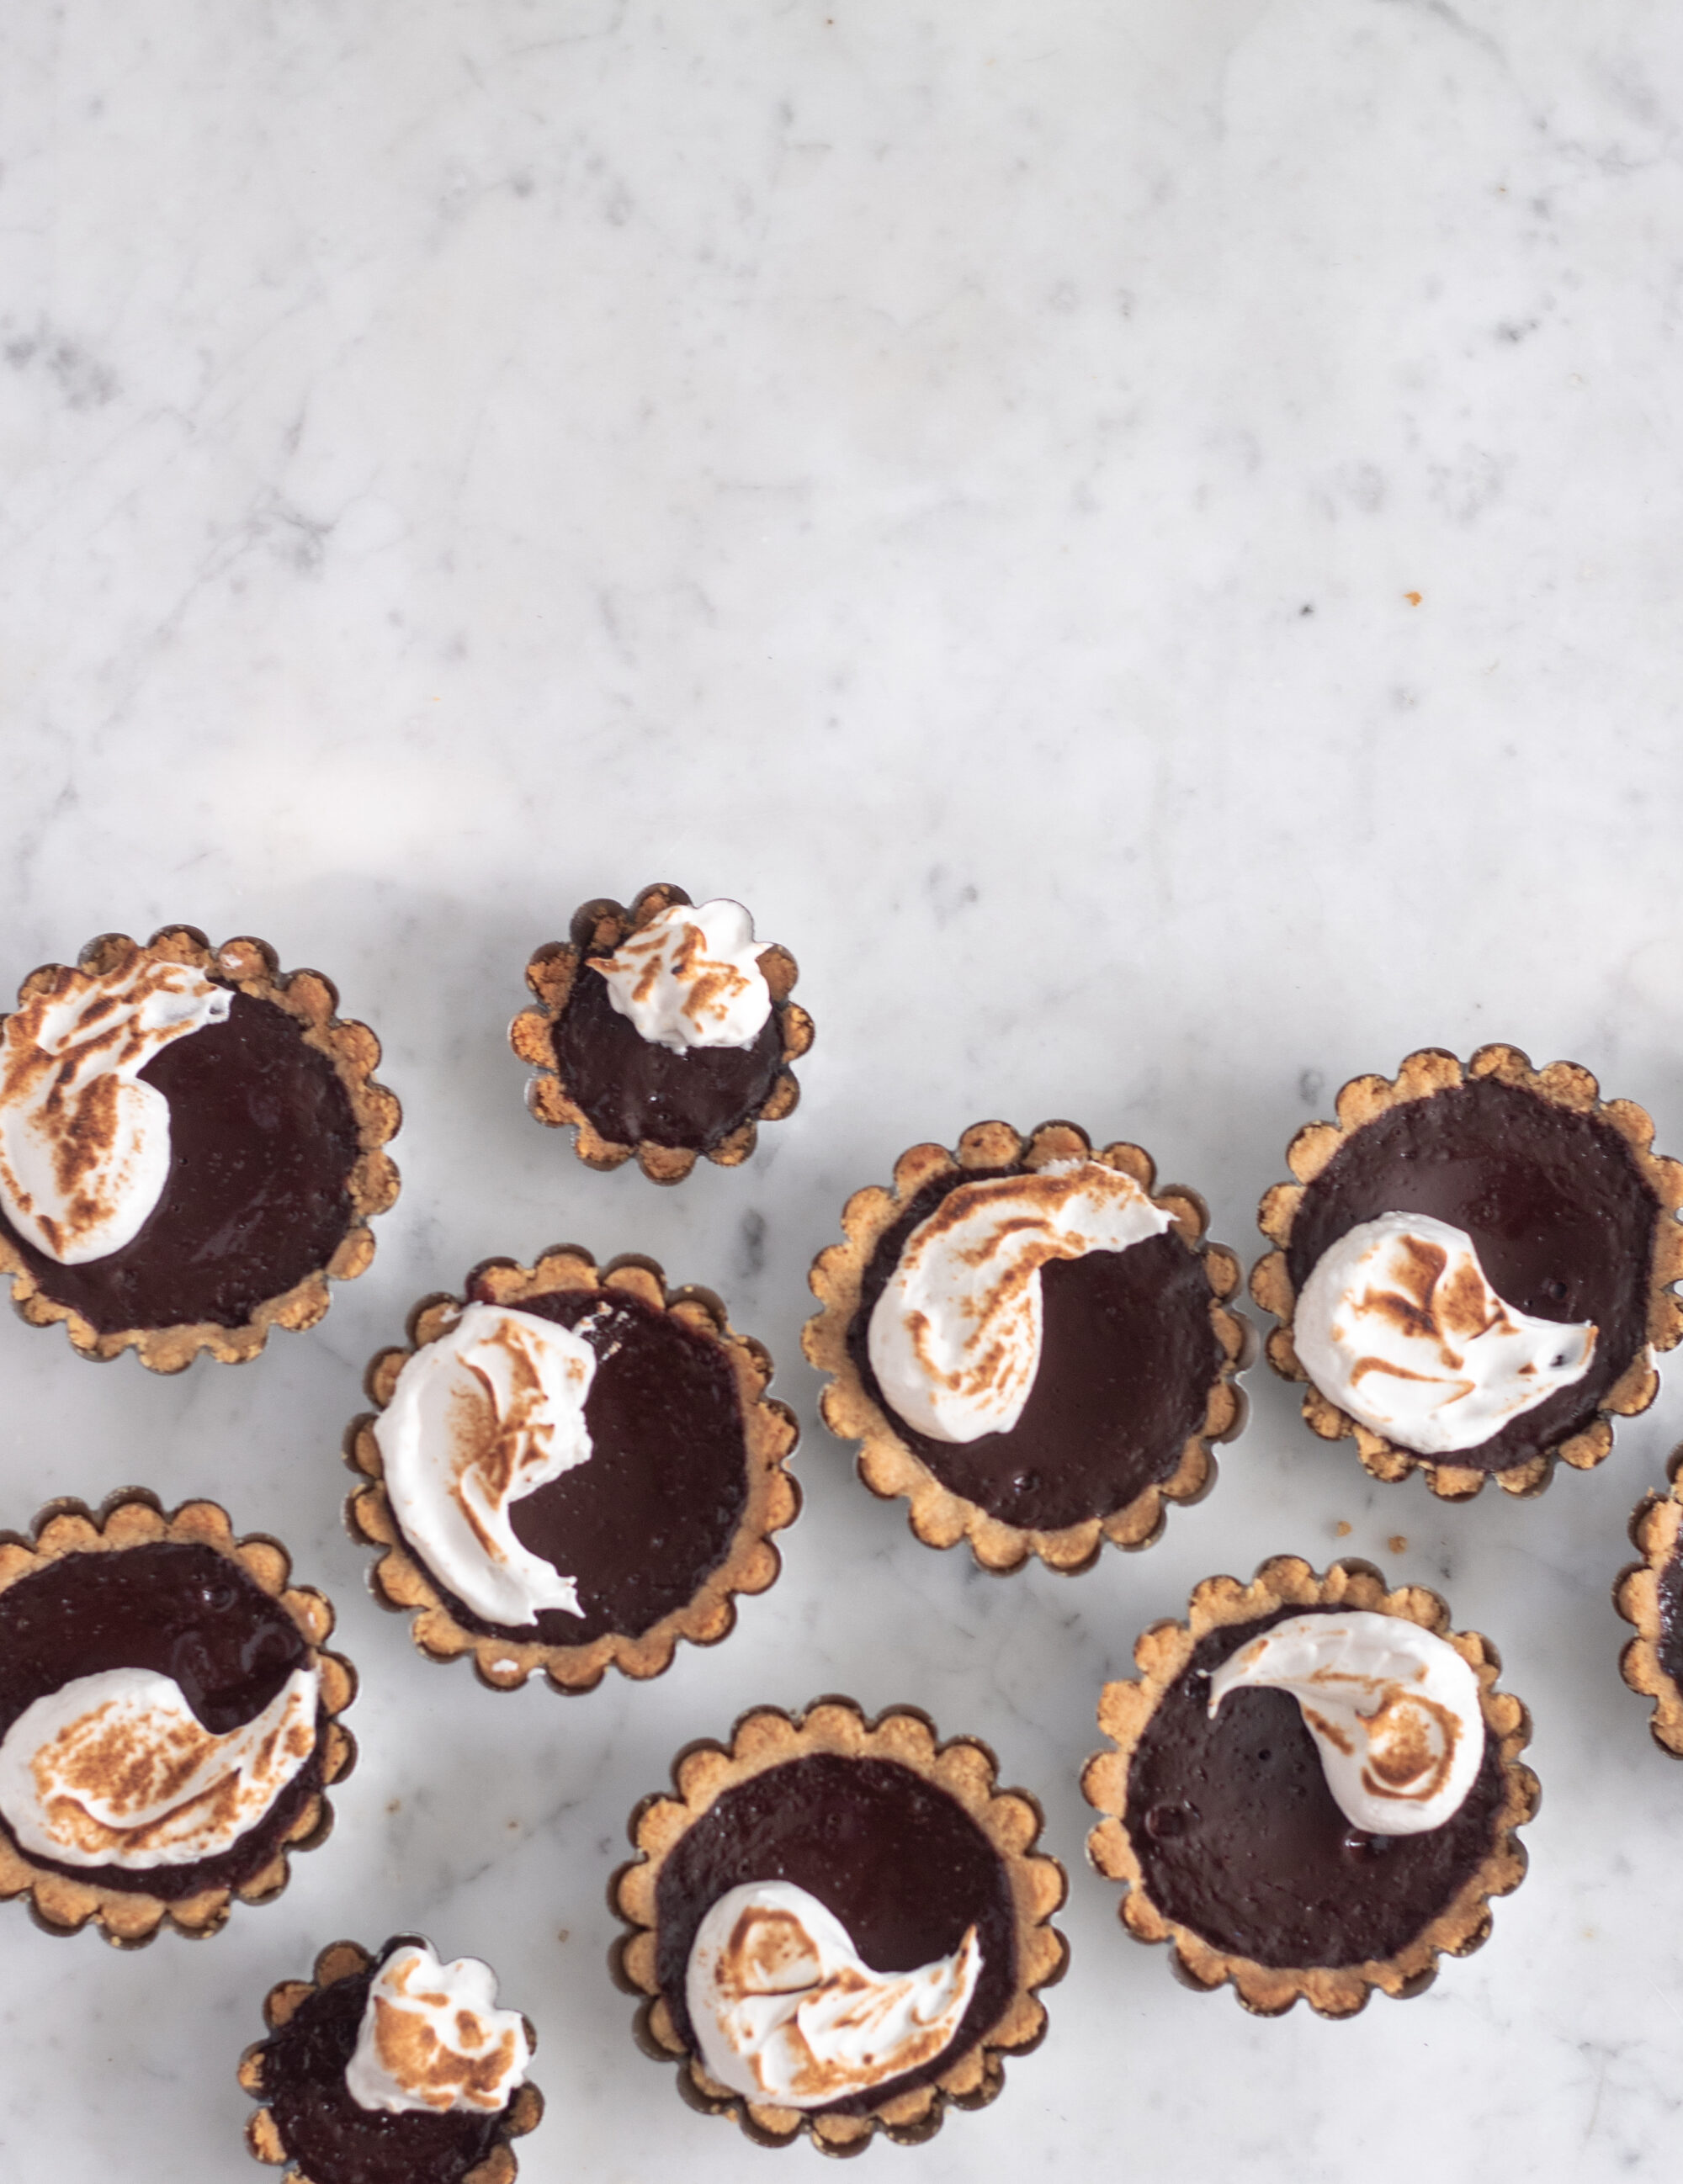 Rows of mini chocolate pies with toasted white topping on a white counter.